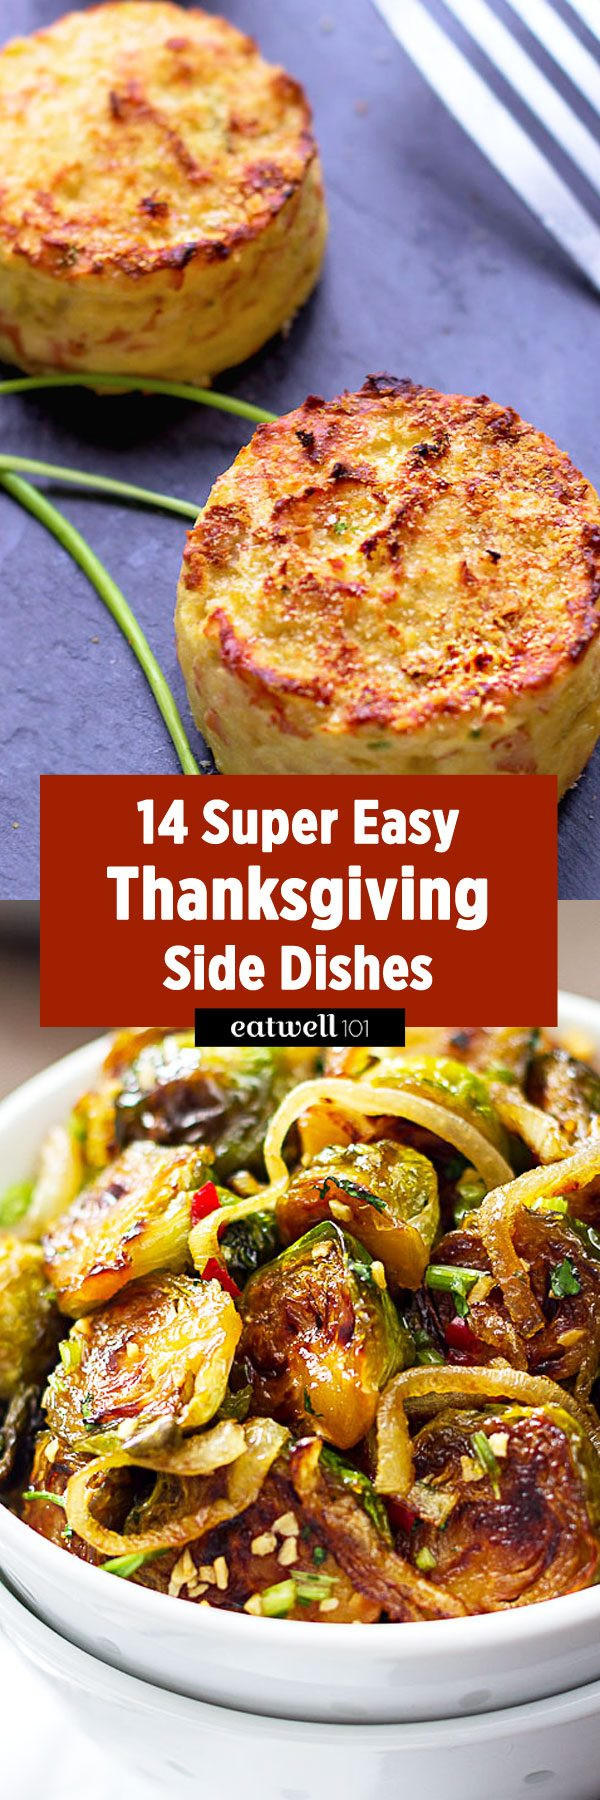 Thanksgiving Easy Side Dishes
 Up Your Thanksgiving With These Super Easy Side Dishes